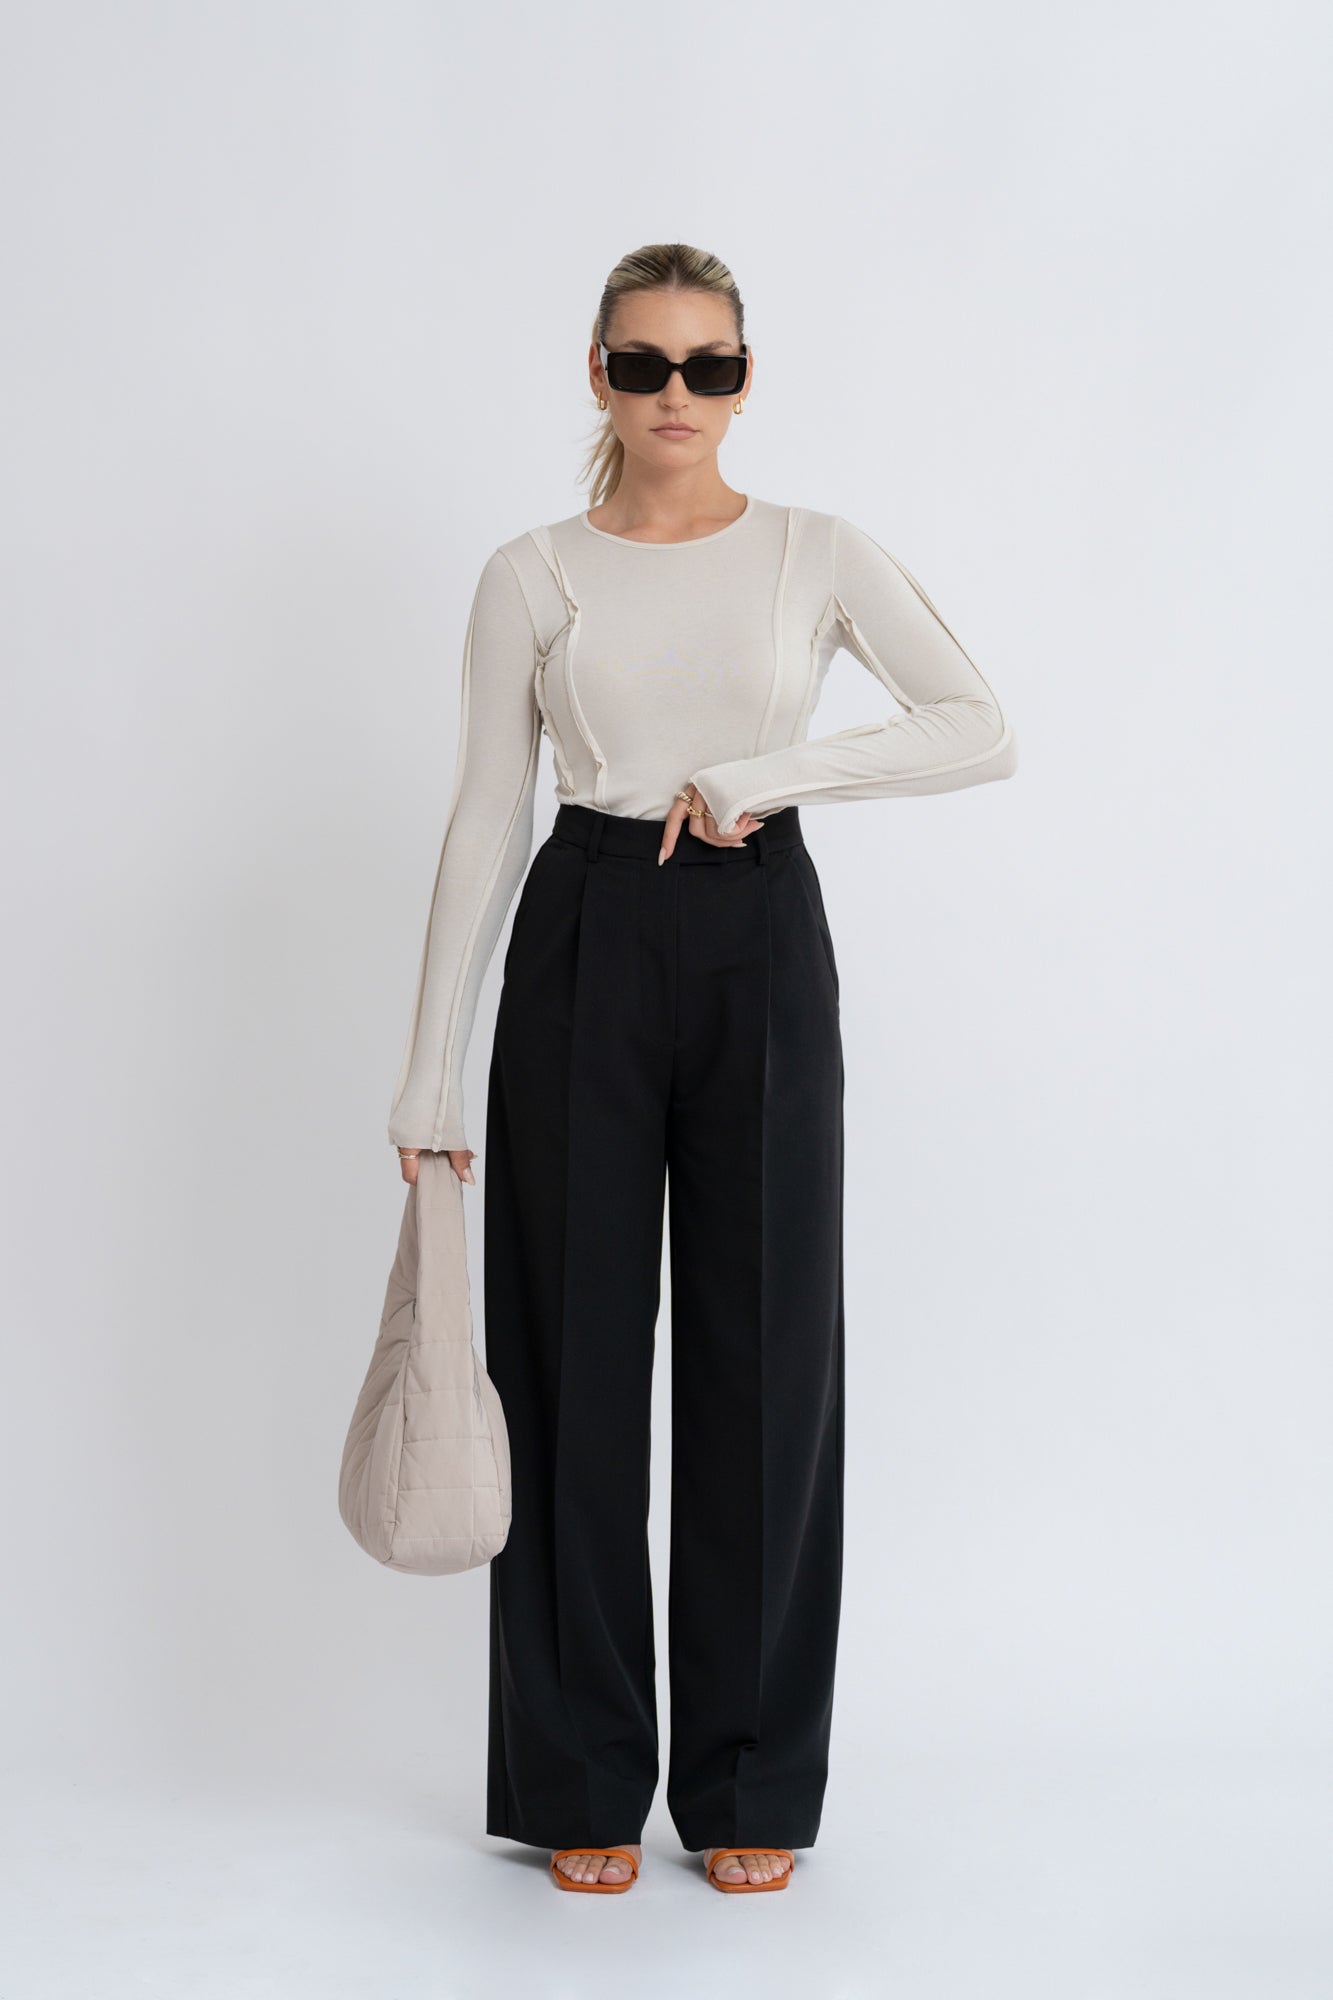 Black Linen Look High Waisted Tailored Trousers  PrettyLittleThing